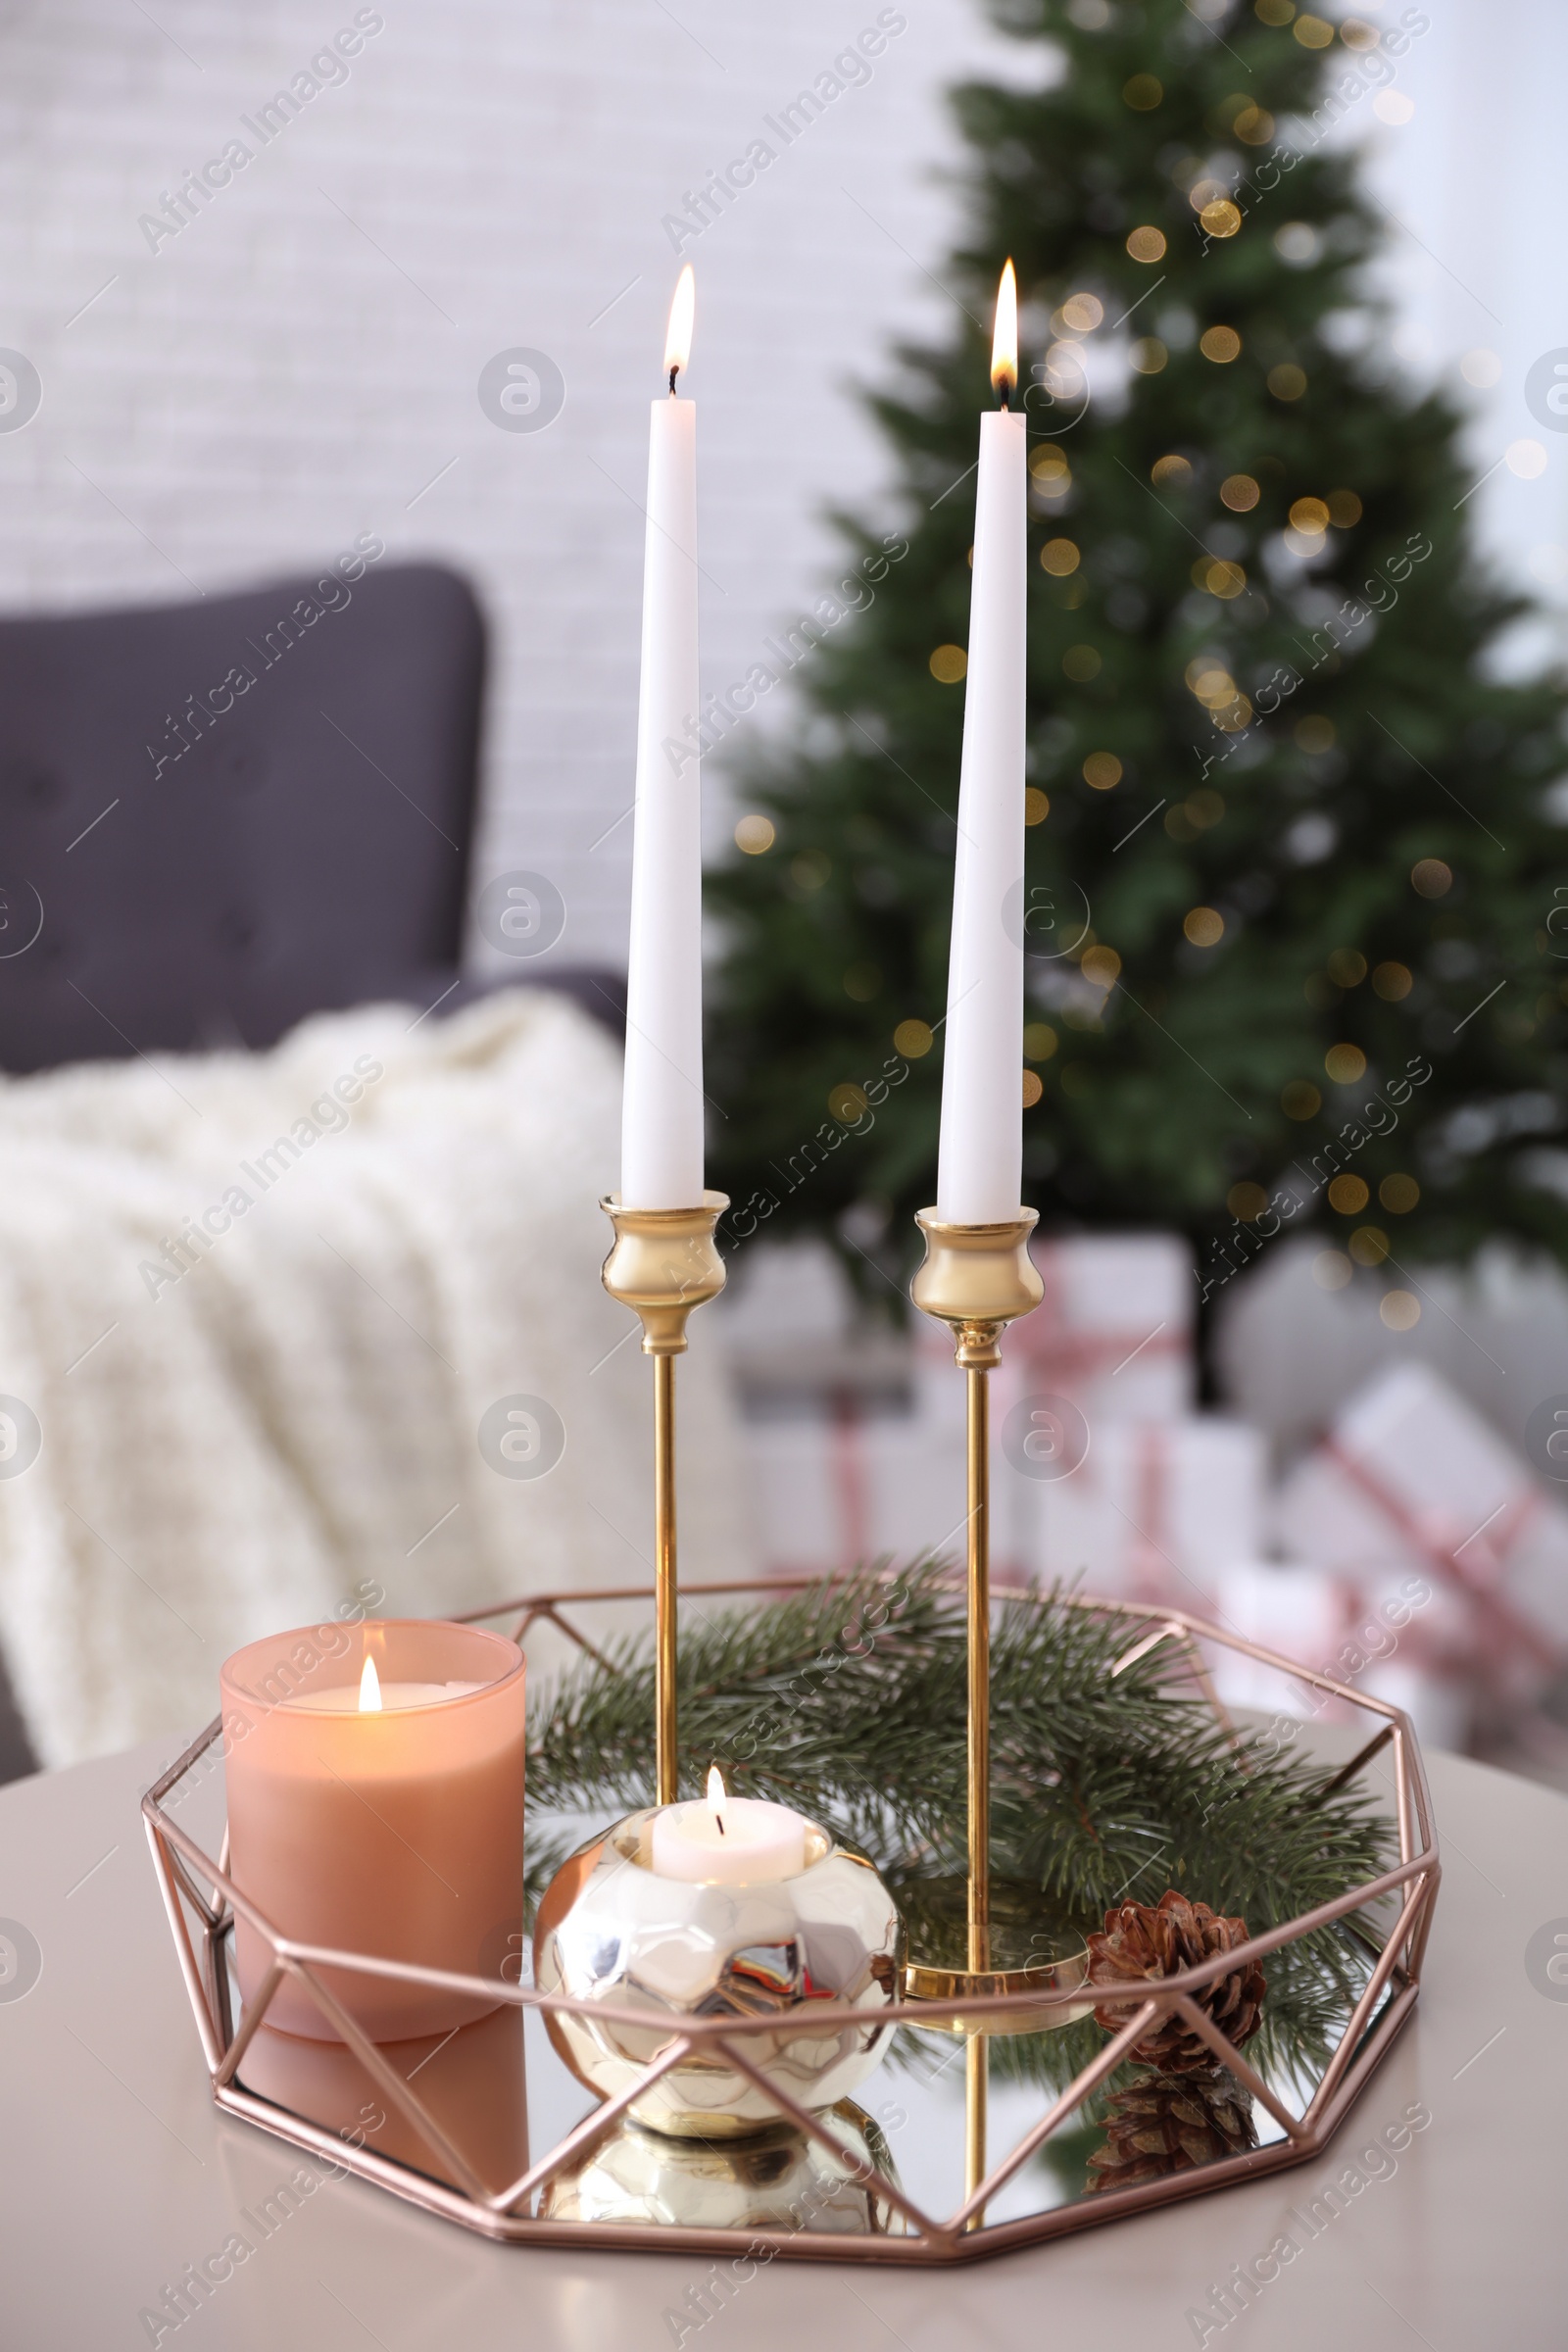 Photo of Burning candles and fir branch on table in room decorated for Christmas